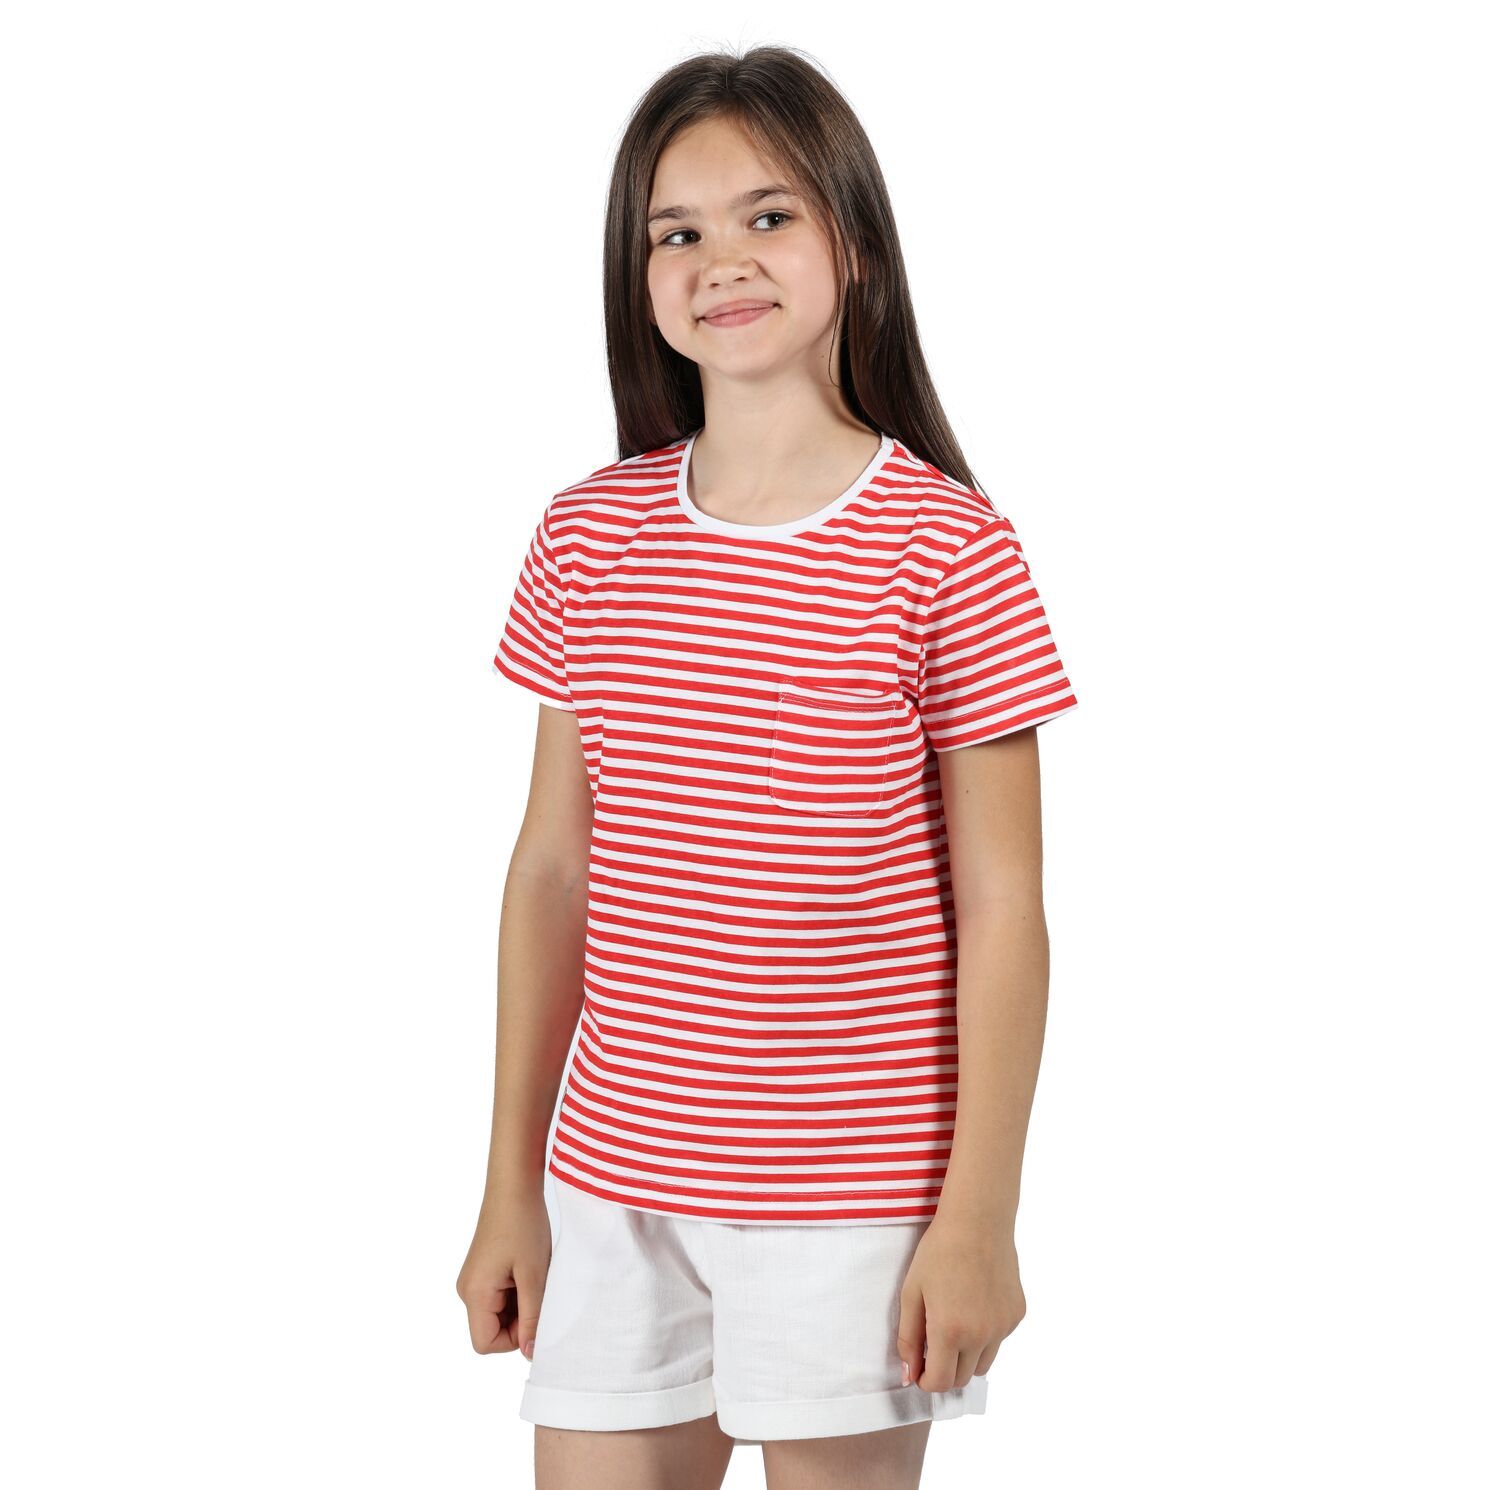 Material: 100% cotton. Coolweave cotton pigment dye jersey fabric. Boys and girls specific fit. 1 chest pocket. Naturally breathable. Light to wear. Chest sizes to fit: (3-4 Yrs): 55-57cm, (5-6 Yrs): 59-61cm, (7-8 Yrs): 63-67cm, (9-10 Yrs): 69-73cm, (11-12 Yrs): 75-79cm, (13 Yrs): 82cm, (14 Yrs): 86cm, (15-16 Yrs): 89-92cm.